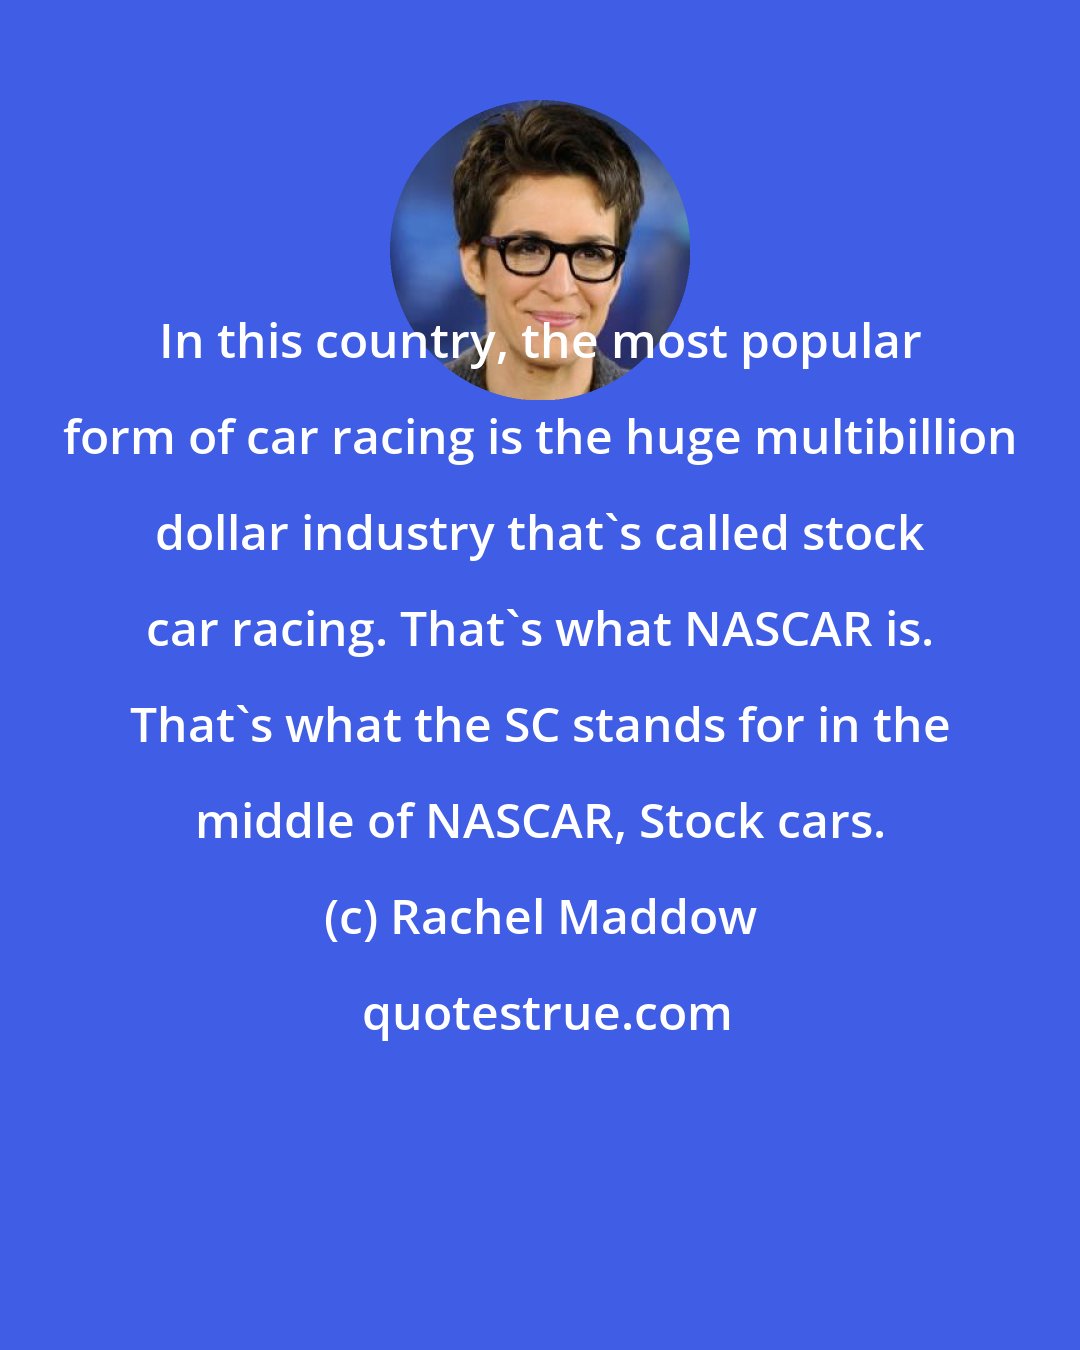 Rachel Maddow: In this country, the most popular form of car racing is the huge multibillion dollar industry that`s called stock car racing. That`s what NASCAR is. That`s what the SC stands for in the middle of NASCAR, Stock cars.